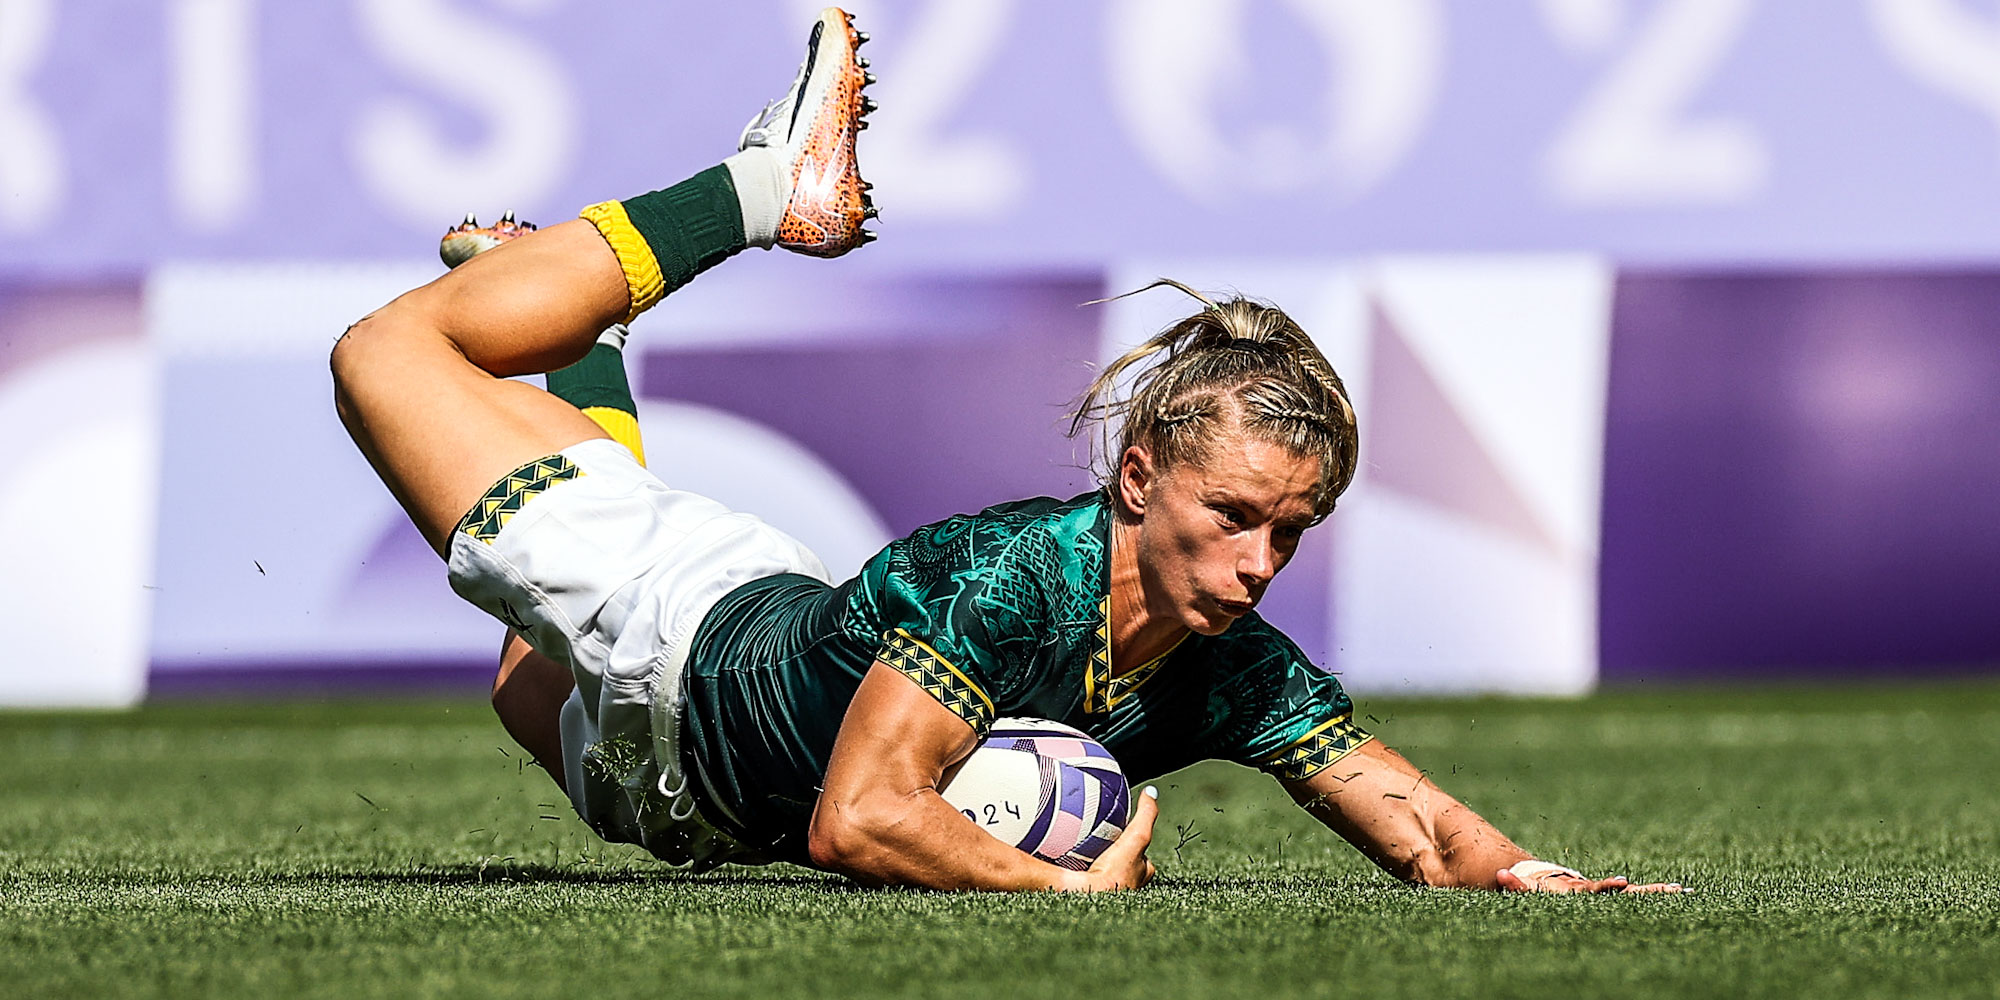 Nadine Roos scored two tries against Fiji.